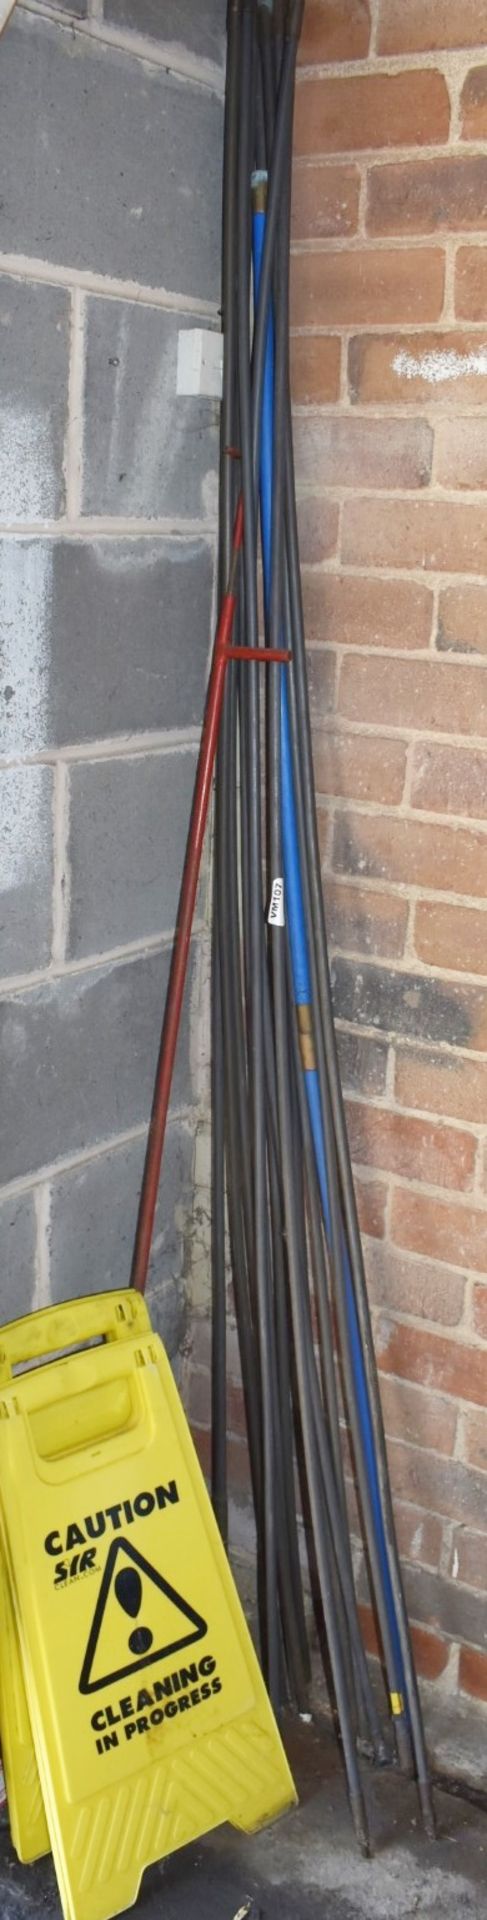 1 x Drain Rod With Approx 15 Lengths and Two Wet Floor Signs - Ref VM107 B2 - CL409 - Location: - Image 2 of 6